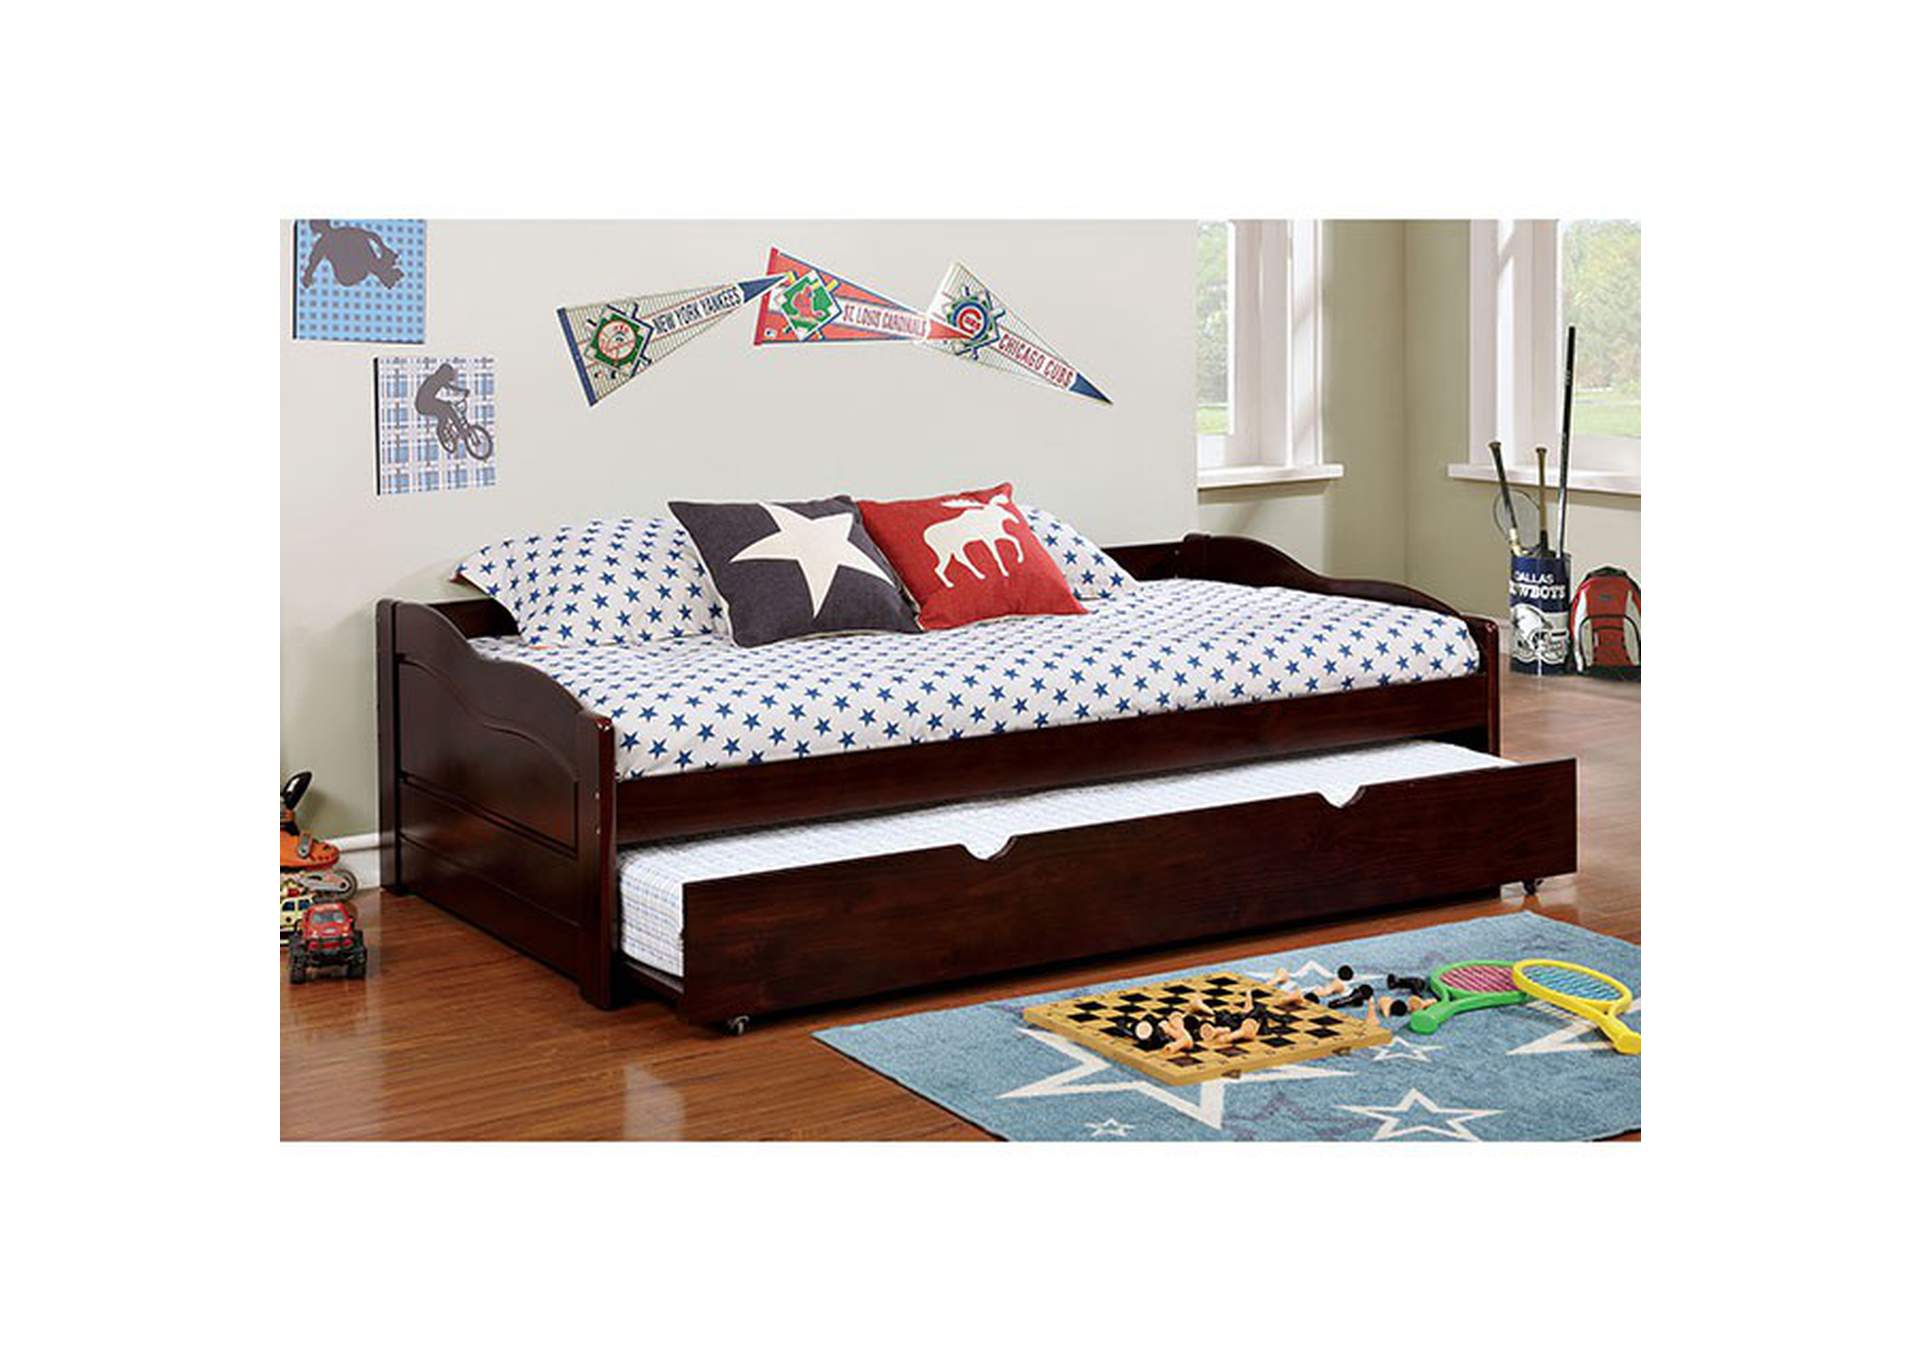 Sunset Twin Daybed,Furniture of America